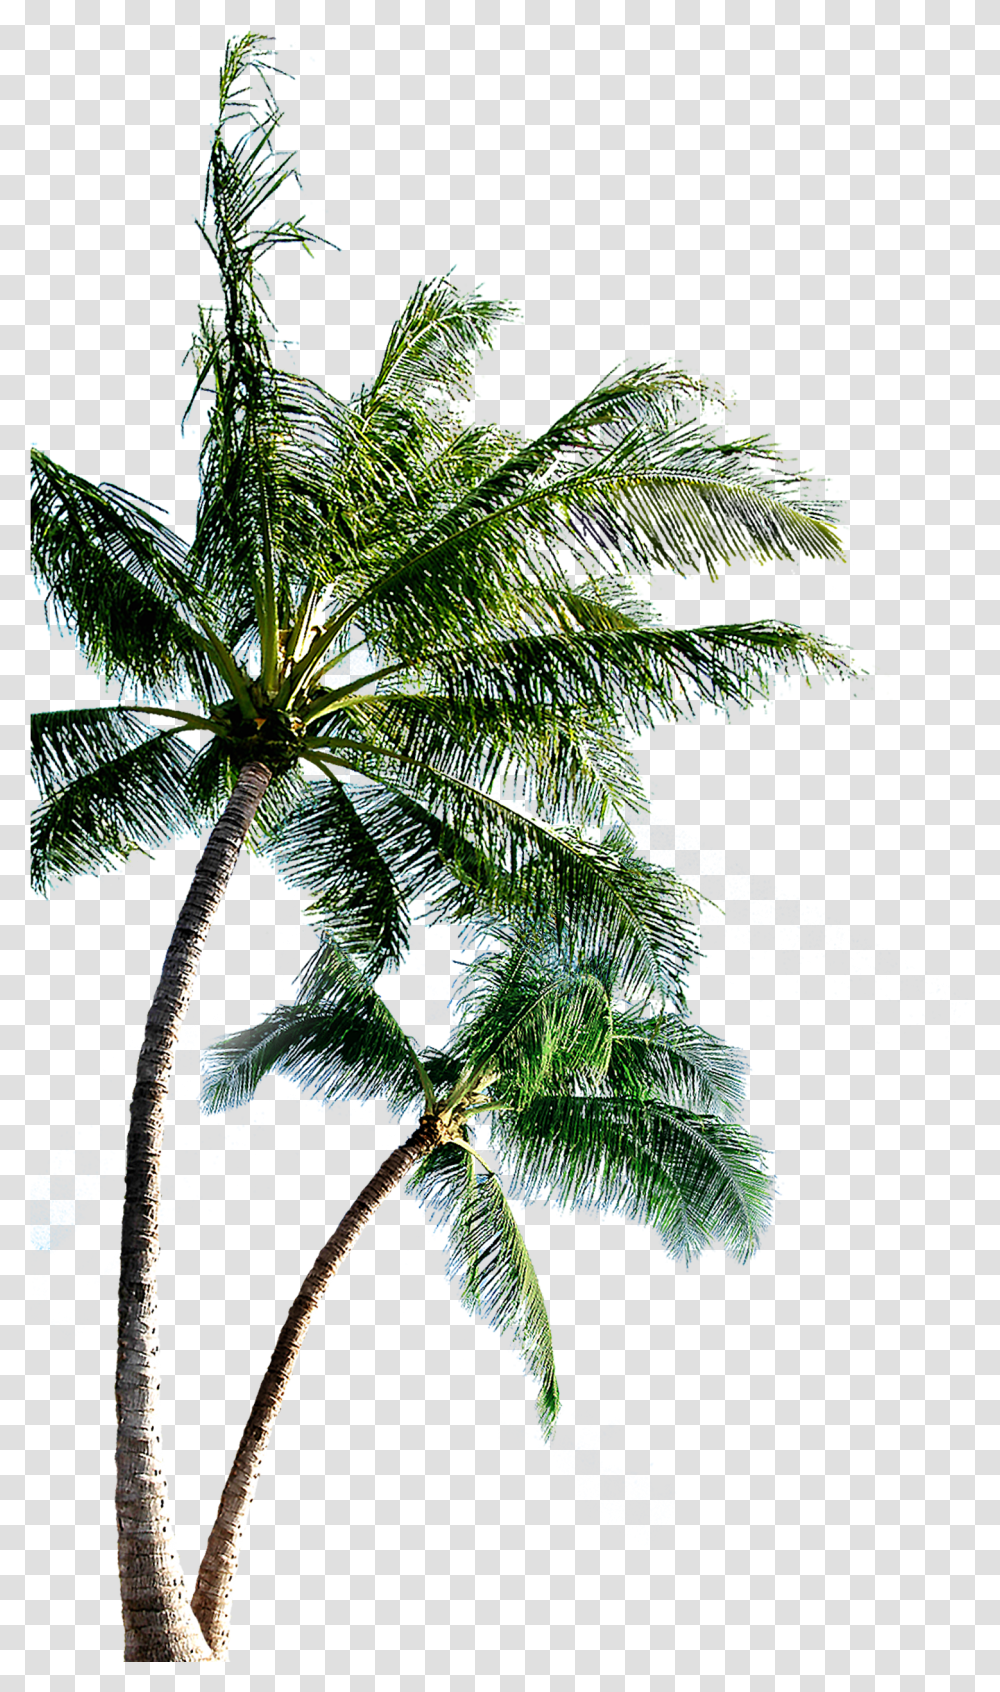 Download Fir Autocad Family Island Scalable Pine Vector Hq Coconut Tree Images, Plant, Palm Tree, Leaf, Outdoors Transparent Png